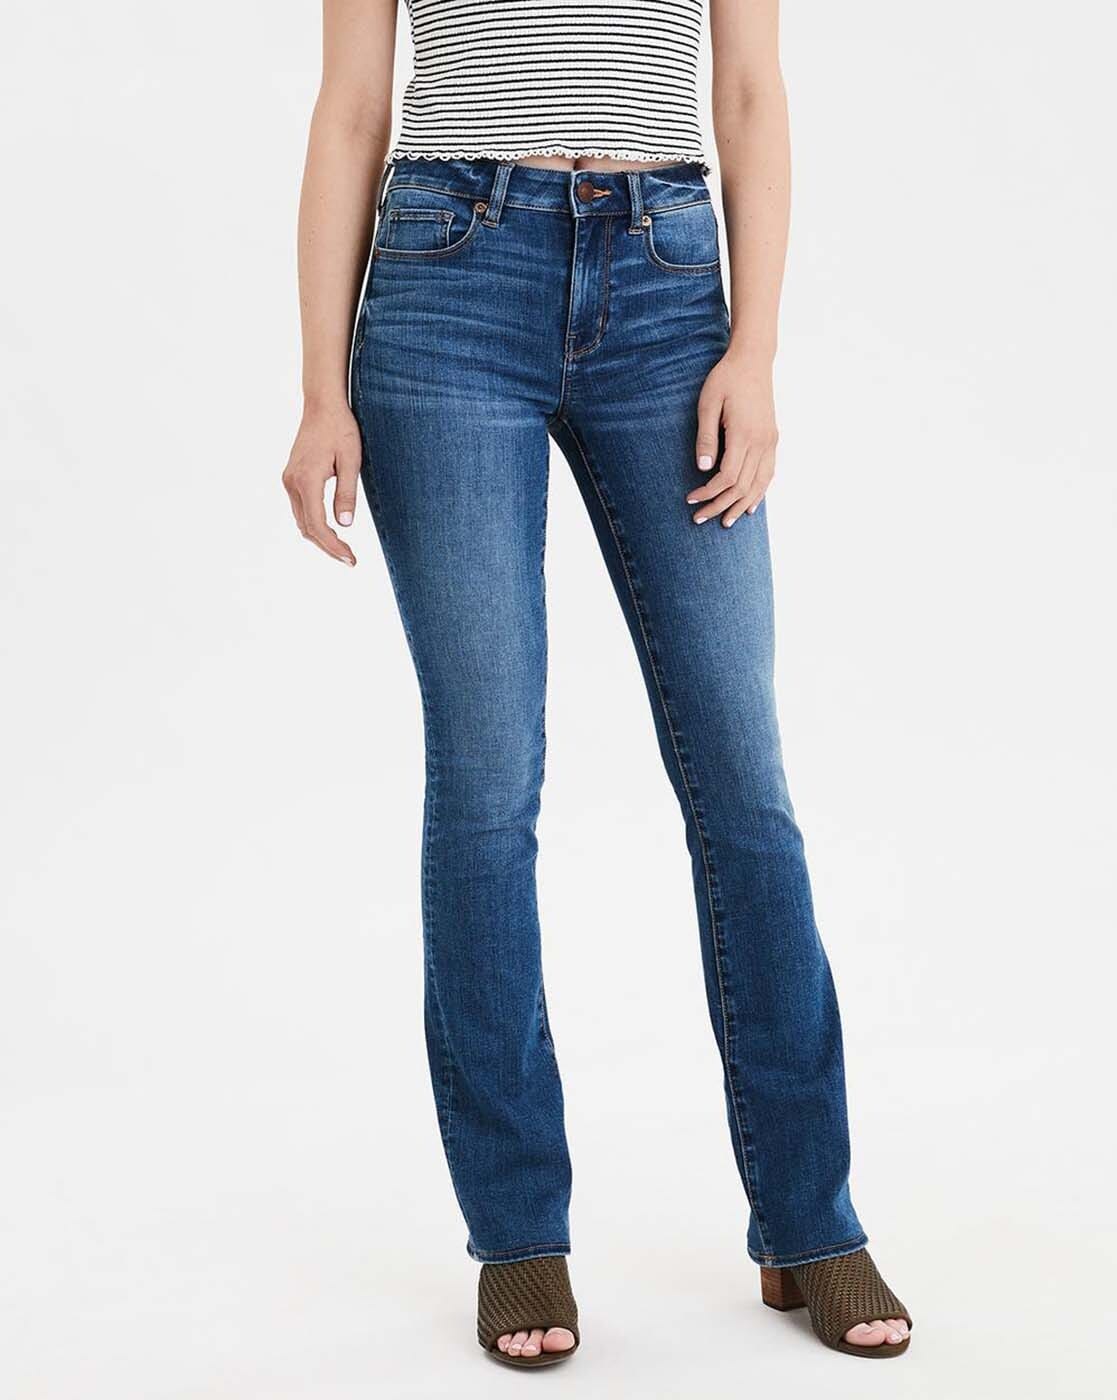 american eagle bootcut jeans womens